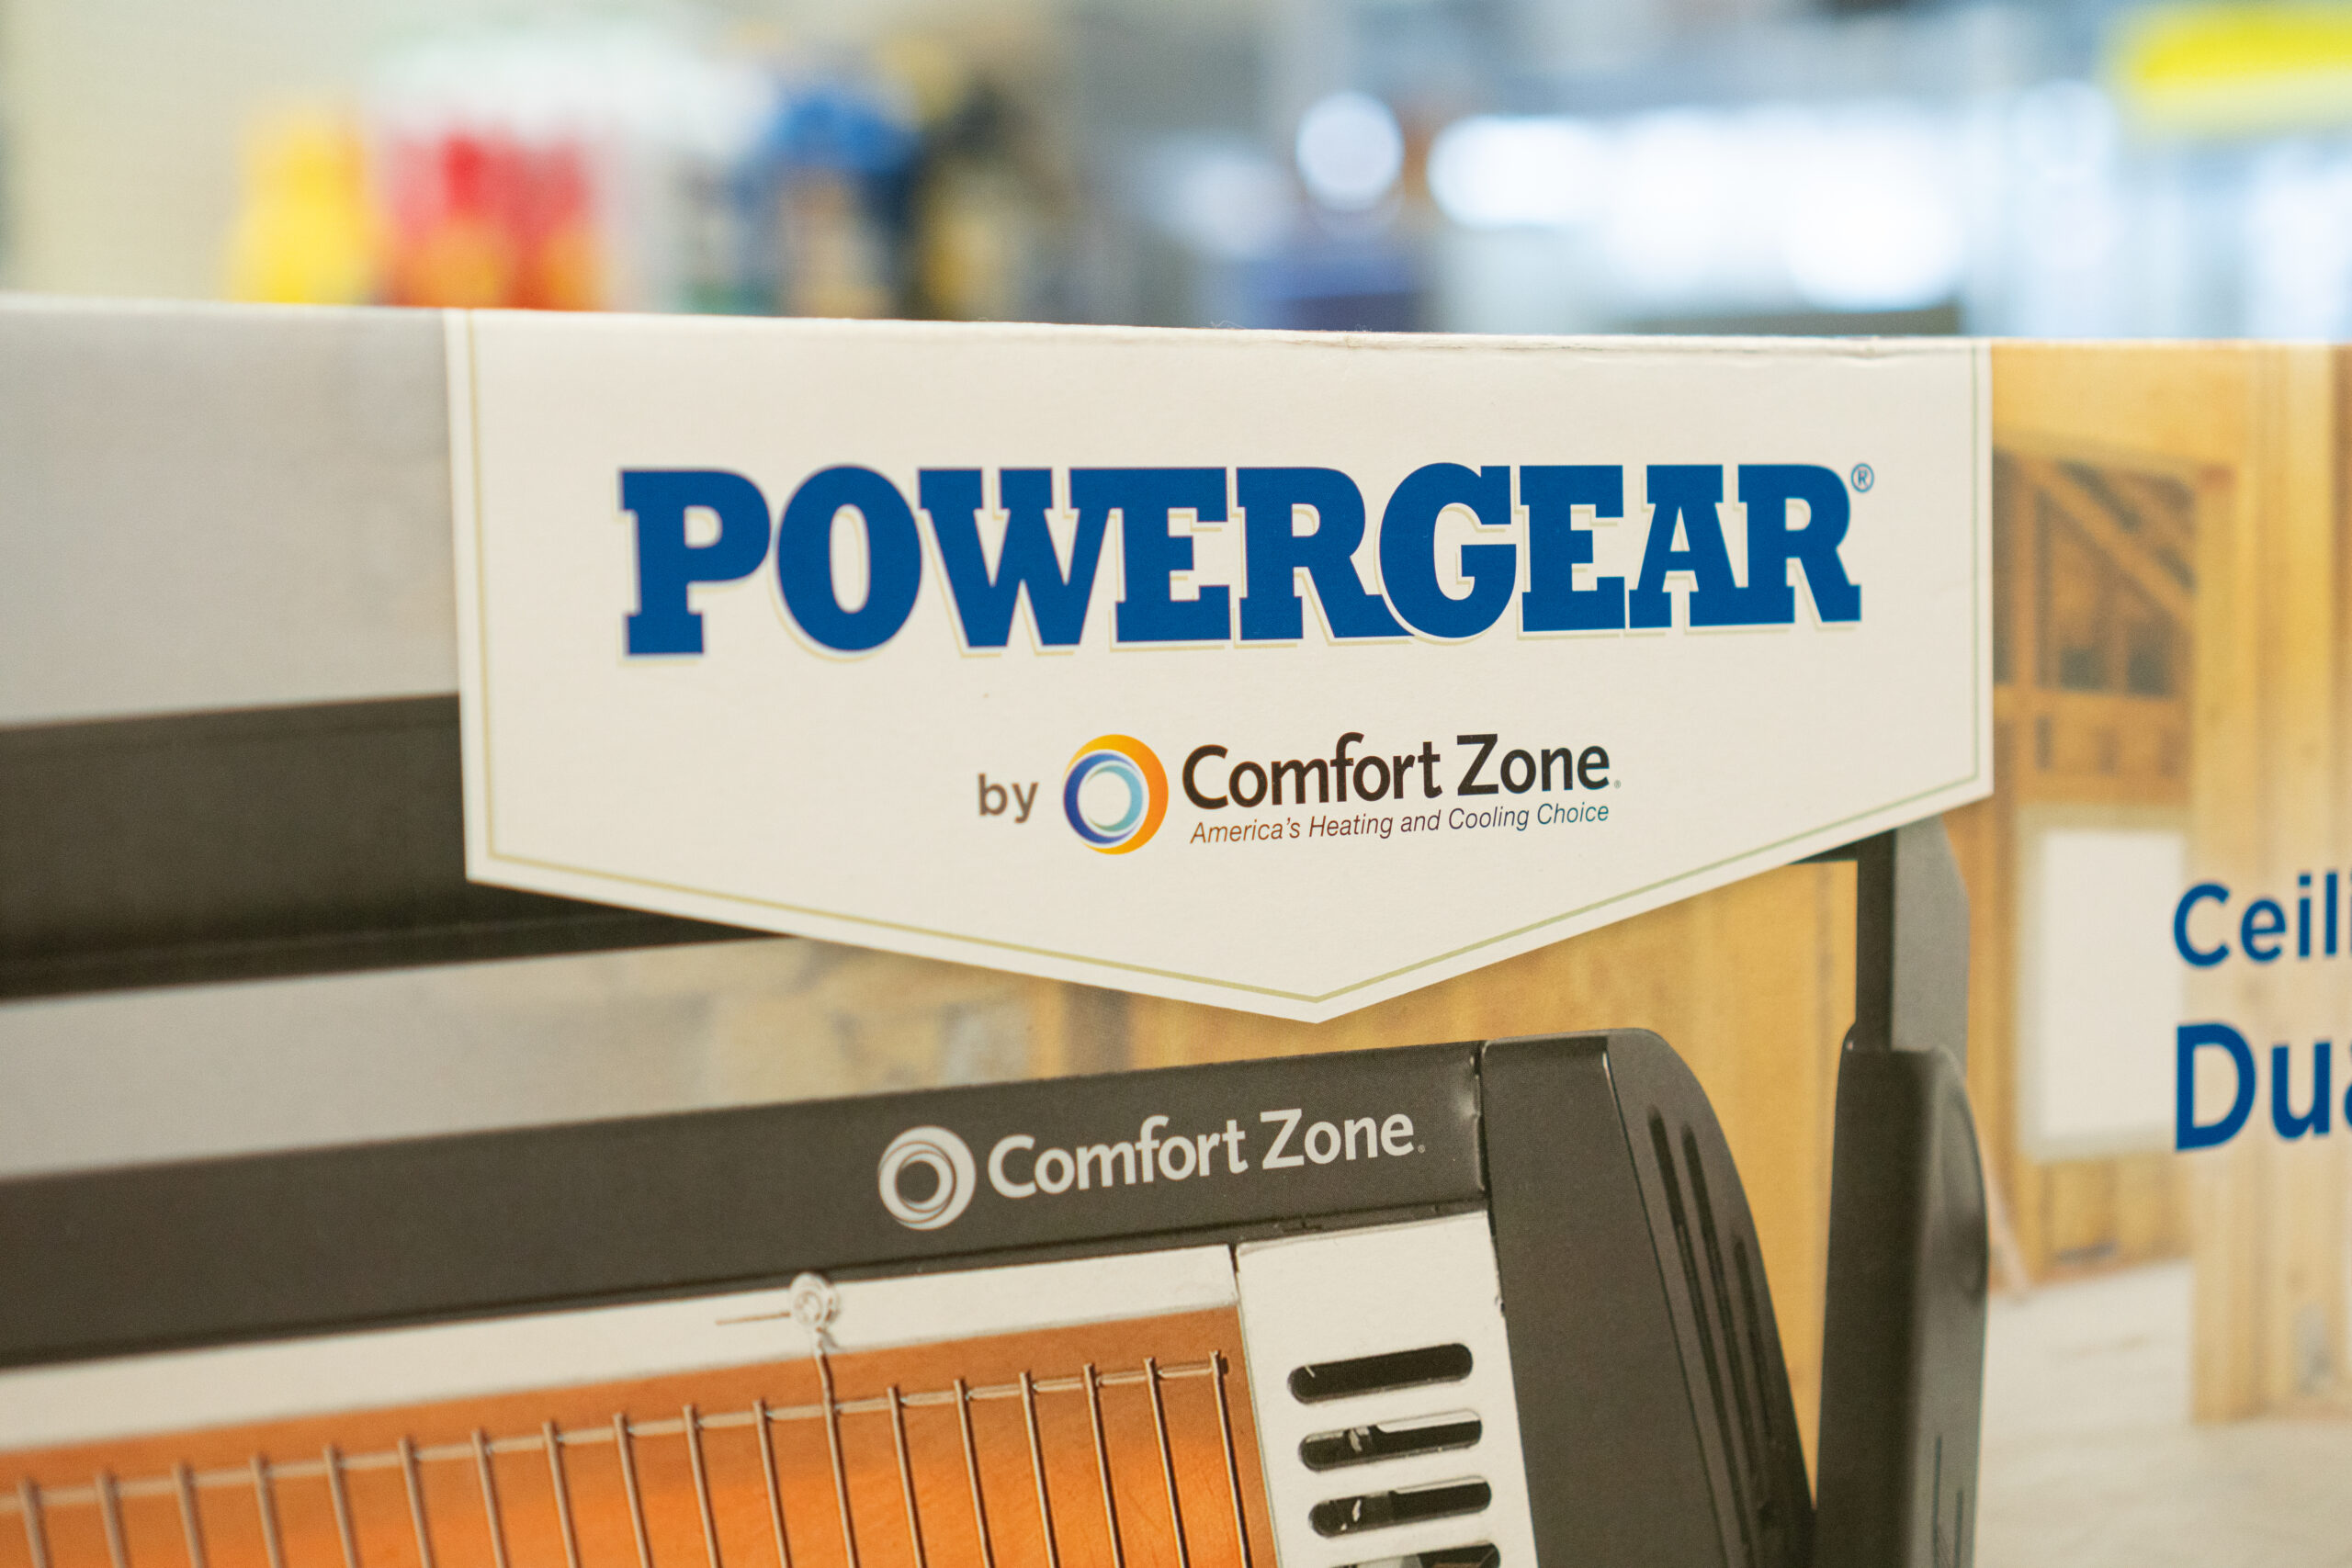 The PowerGear Logo on the packaging for a heater.